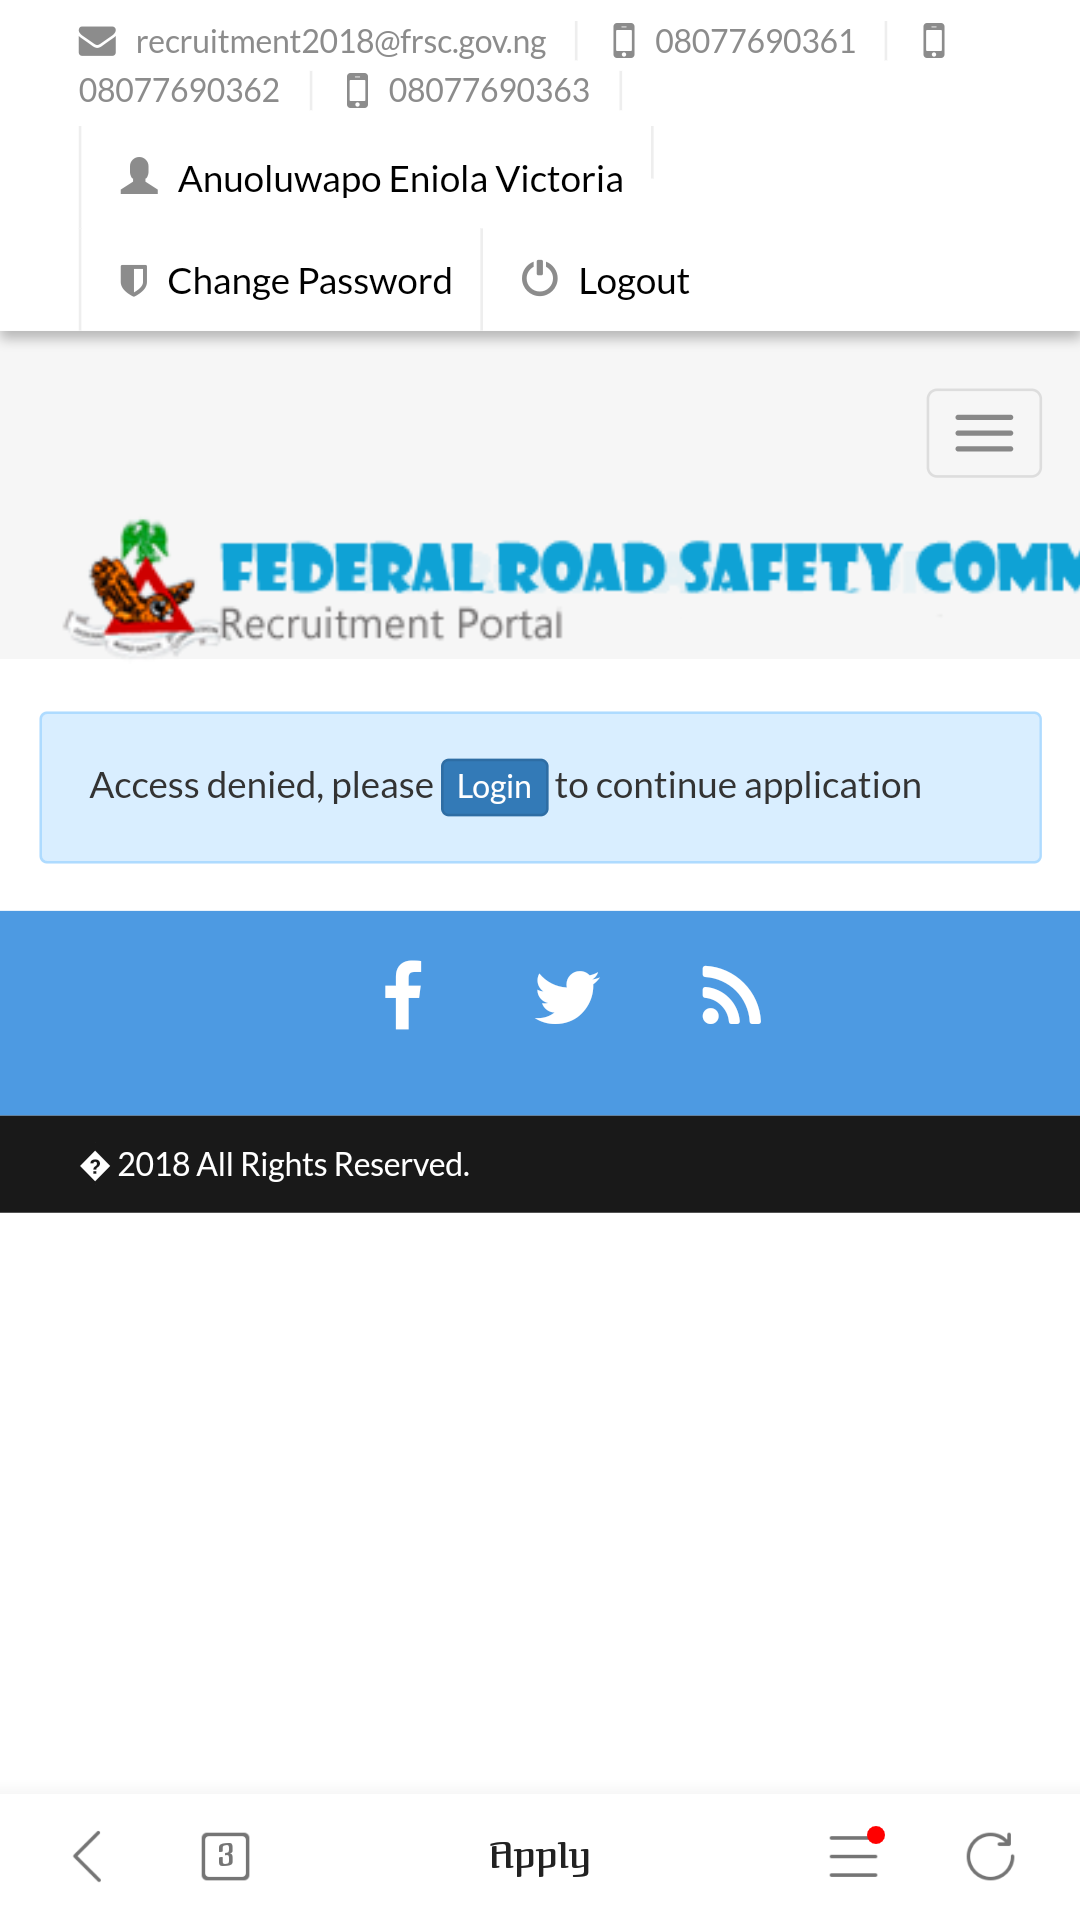 federal-road-safety-commission-2018-recruitment-how-to-apply-jobs-vacancies-65-nigeria